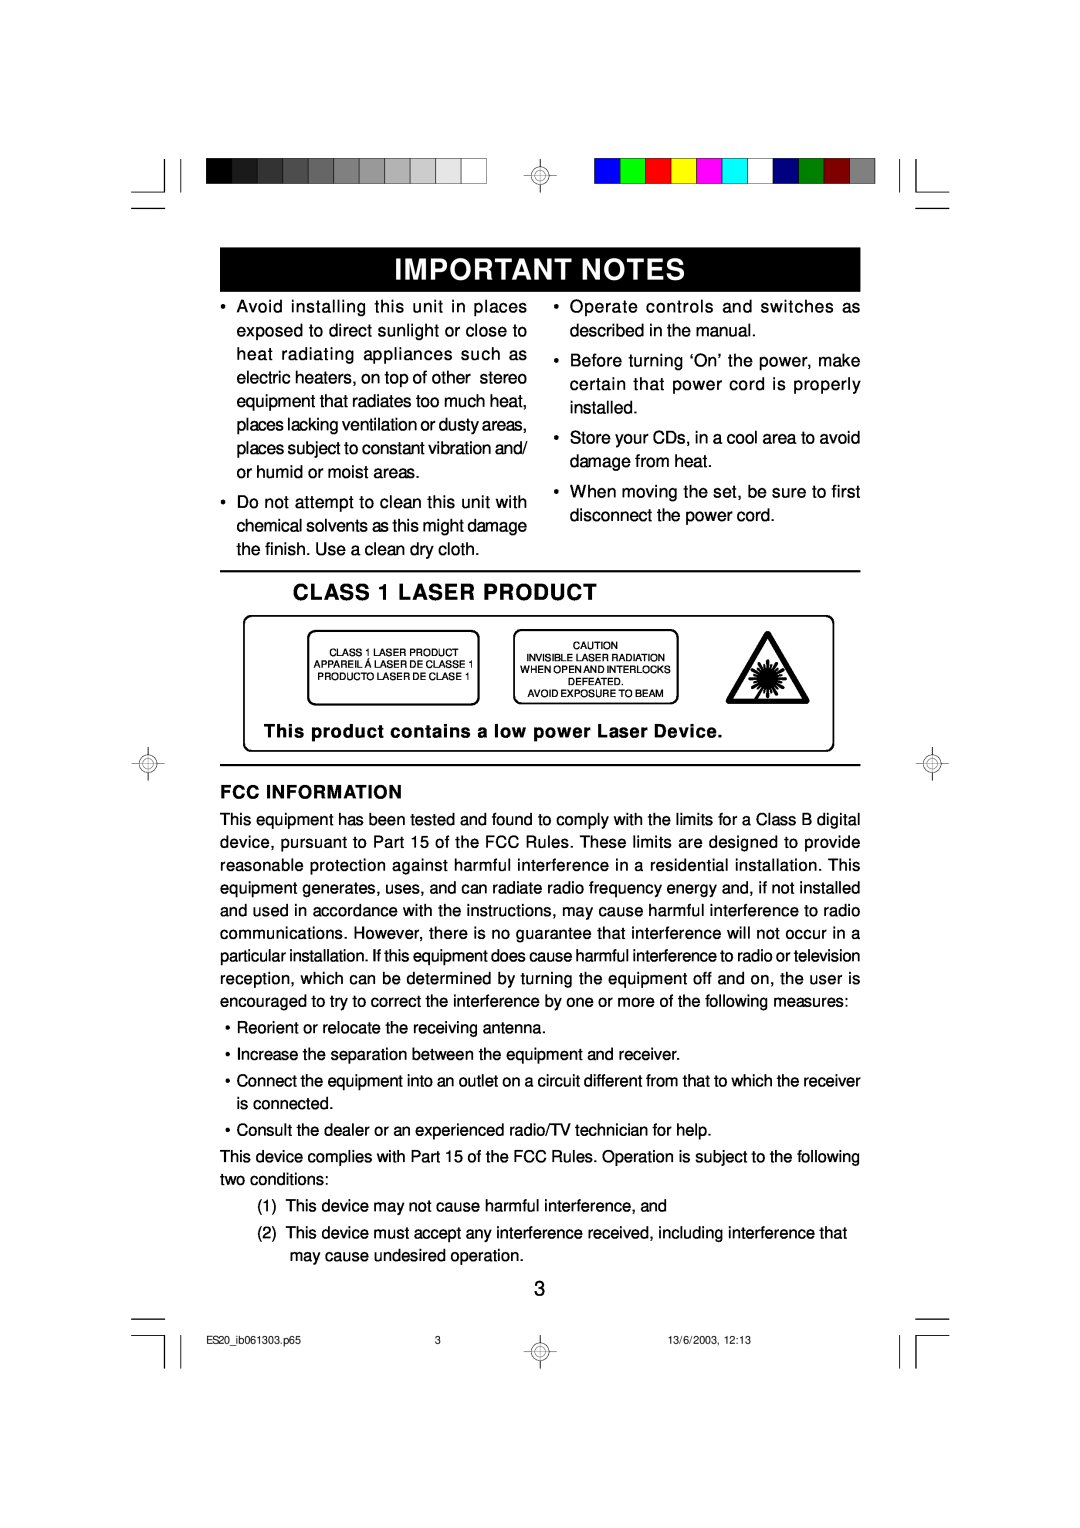 Emerson ES20 owner manual Important Notes, CLASS 1 LASER PRODUCT 